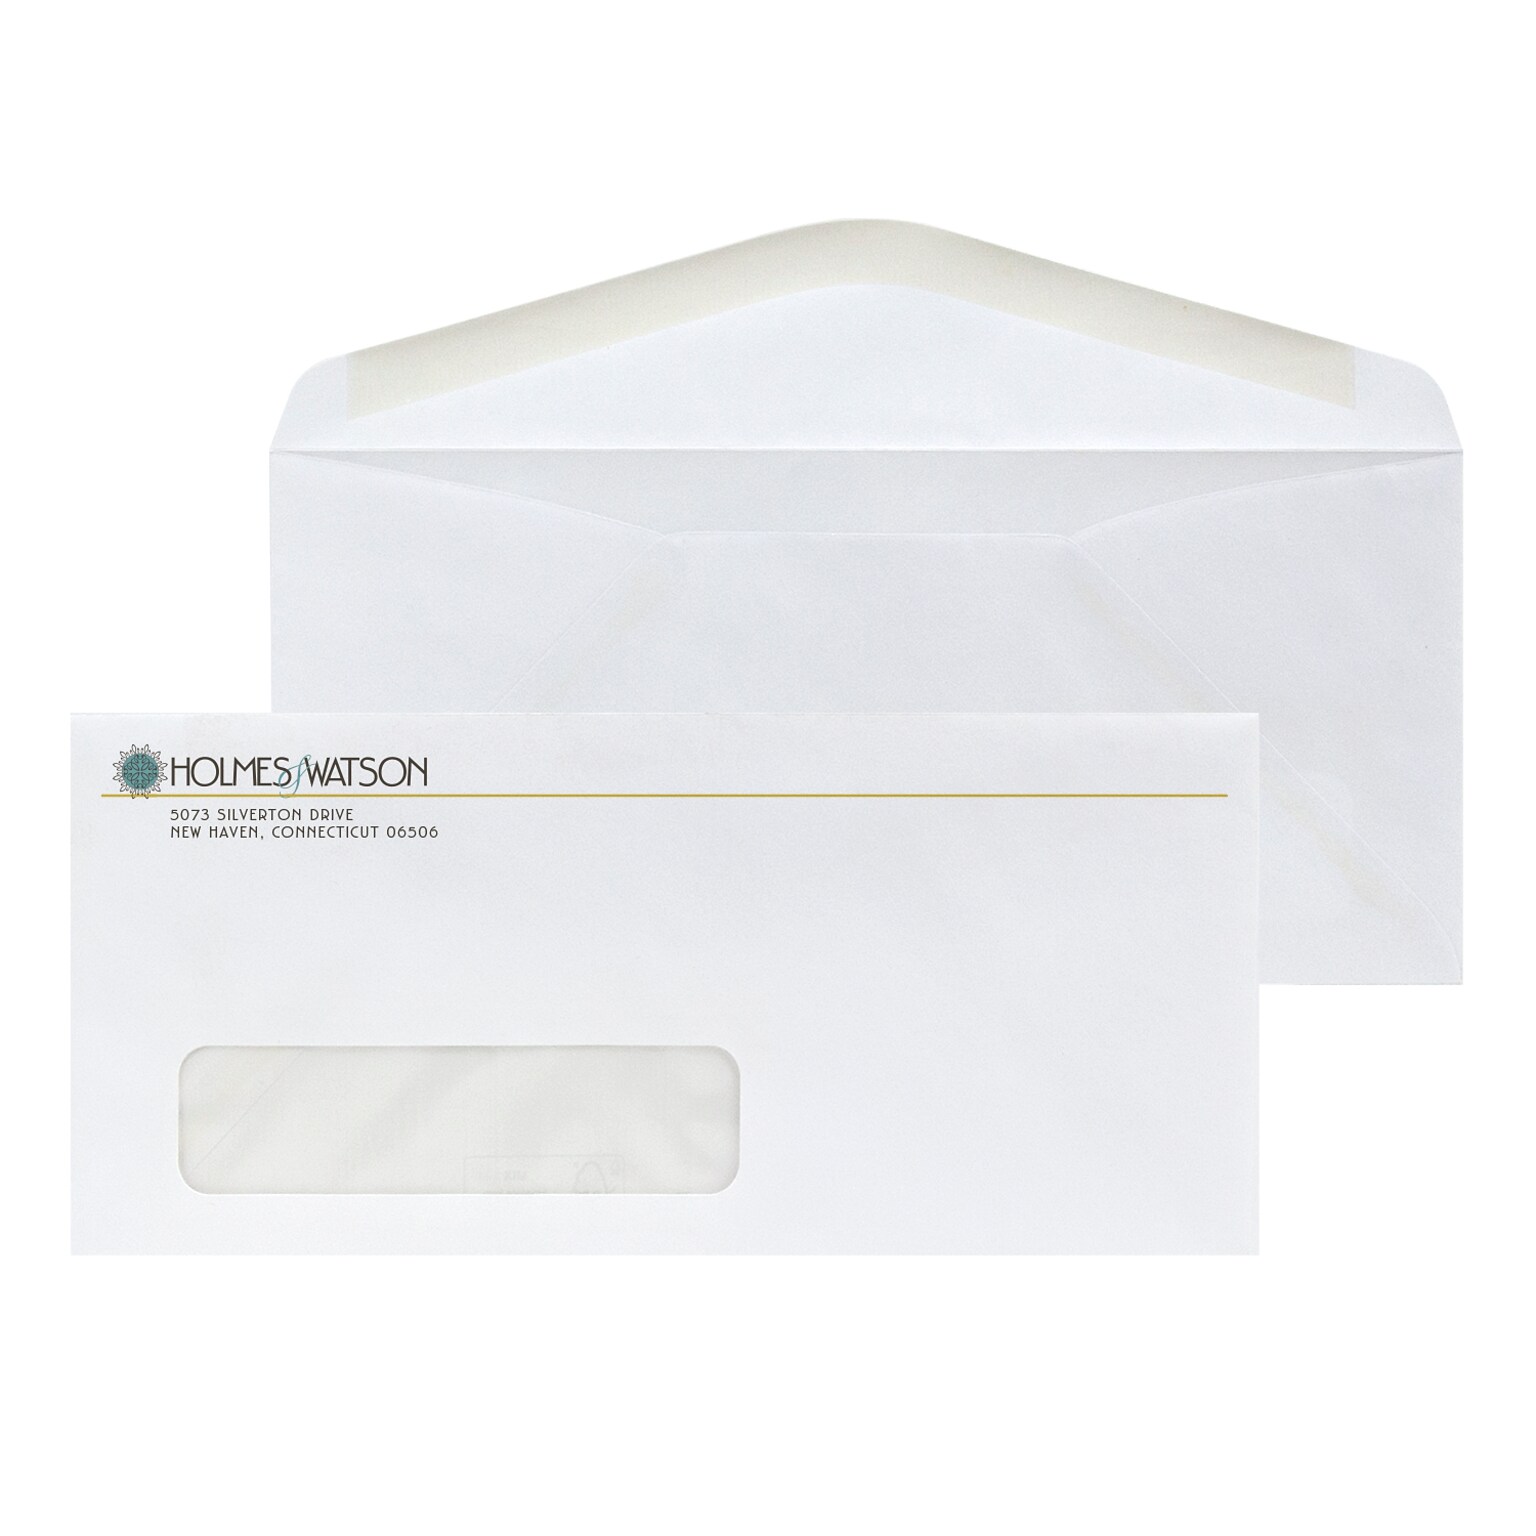 Custom Full Color #10 Window Envelopes, 4 1/4 x 9 1/2, Recycled 24# White Wove with EarthFirst/SFI Logo, 250 / Pack